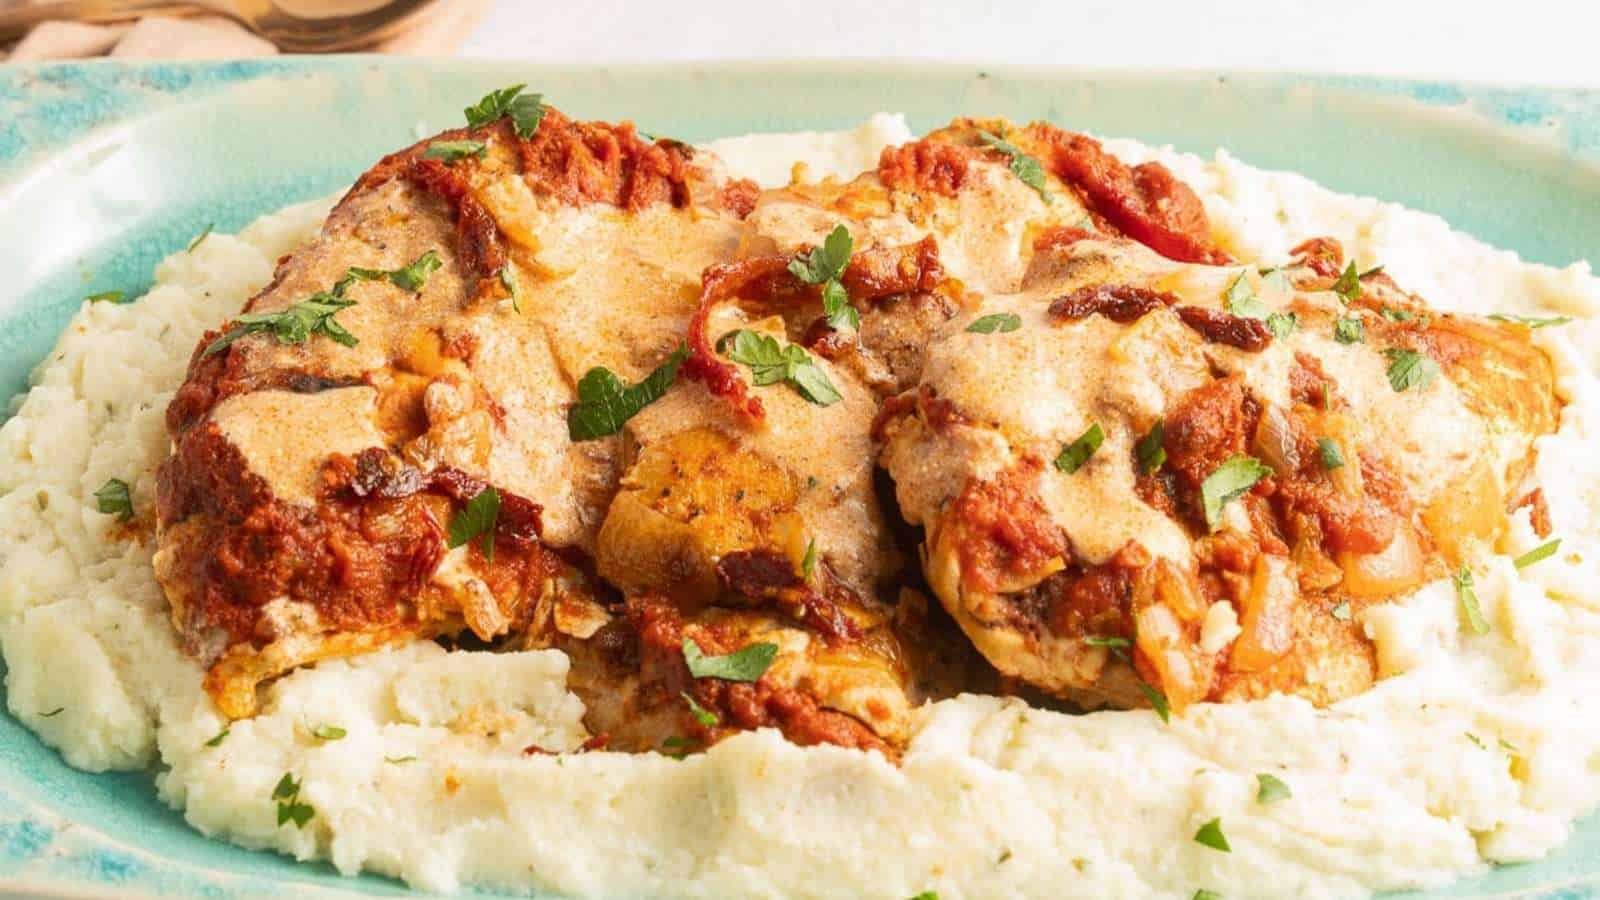 A plate with chicken and mashed potatoes on it.